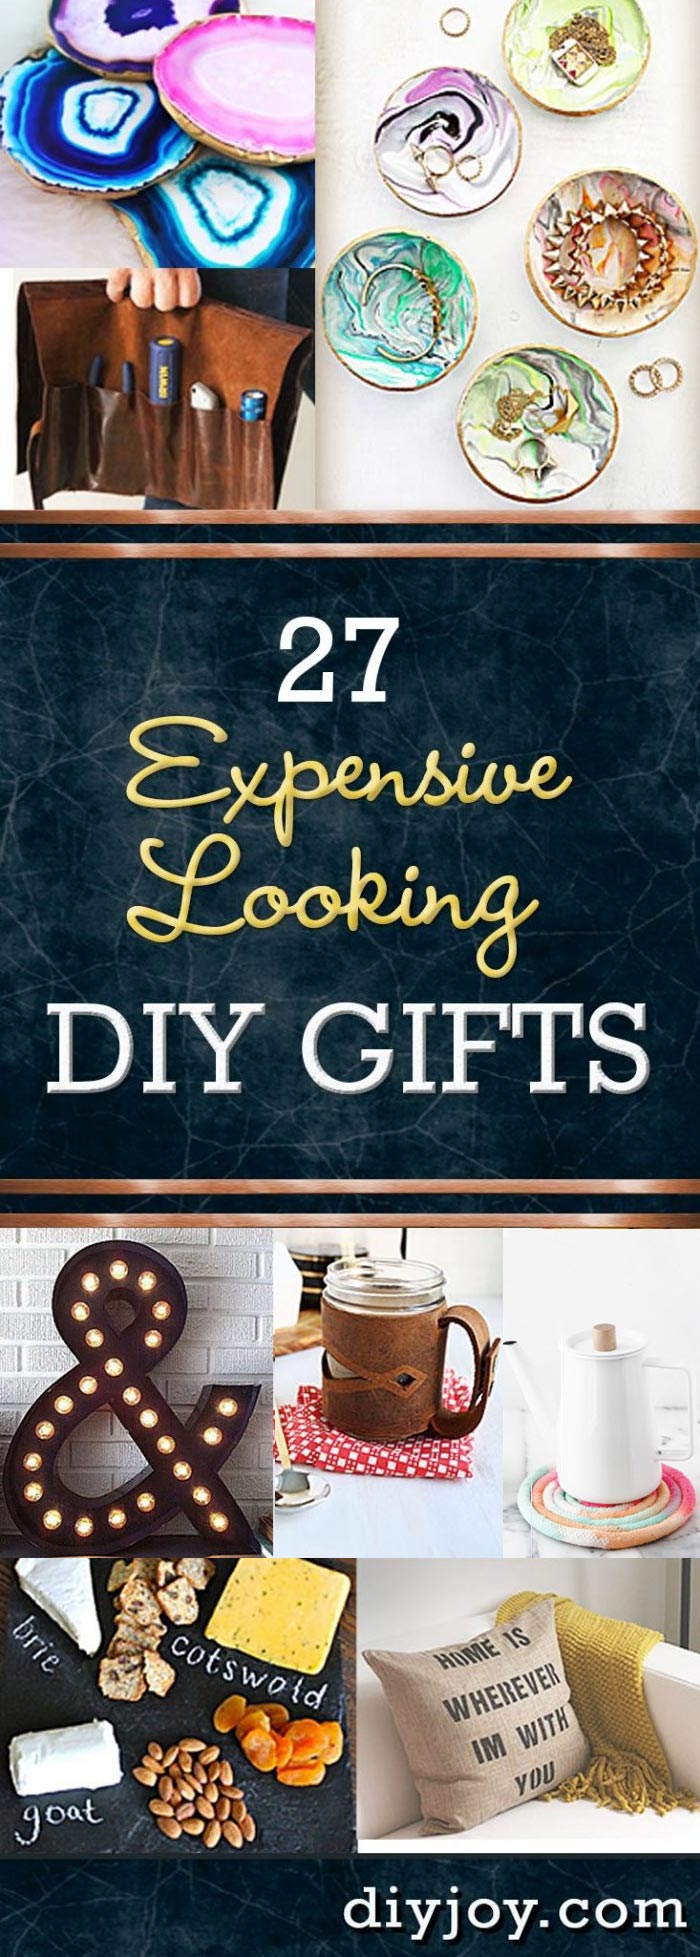 Inexpensive DIY Gifts and Creative Crafts and Projects that Make Cool DIY Gift Ideas CHEAP!